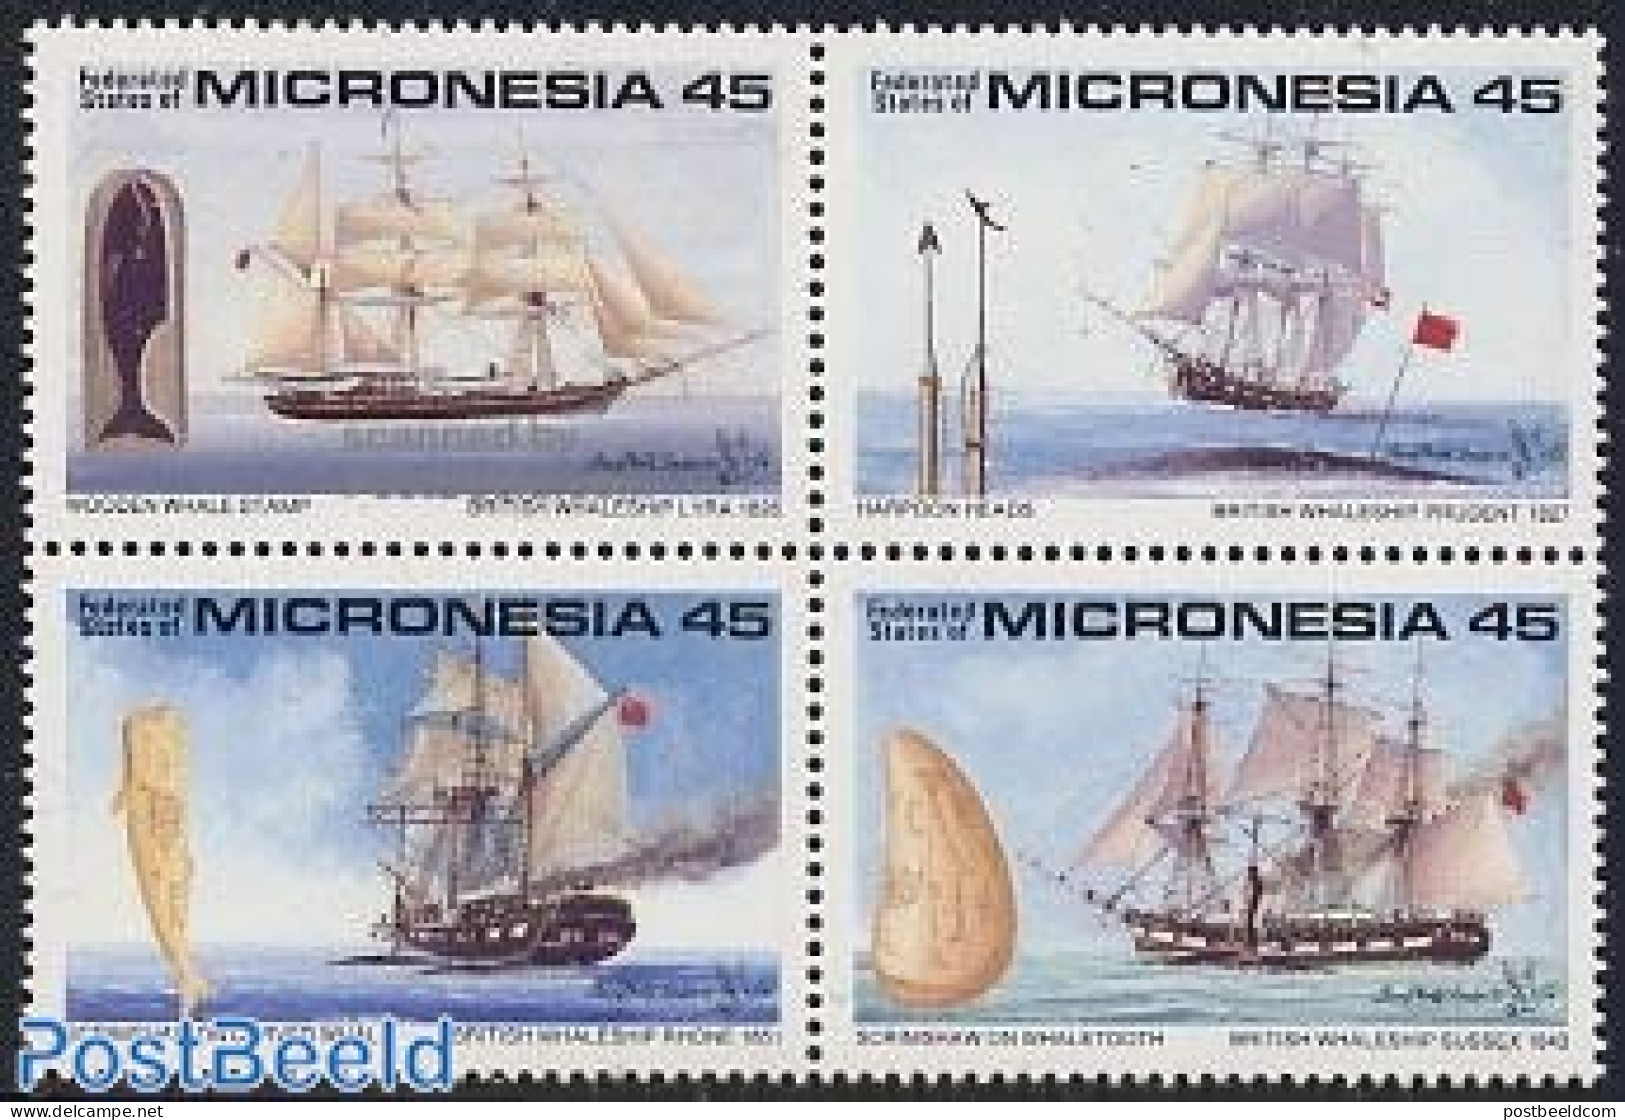 Micronesia 1990 Whale Fishing 4v [+], Mint NH, Nature - Transport - Fishing - Sea Mammals - Ships And Boats - Poissons